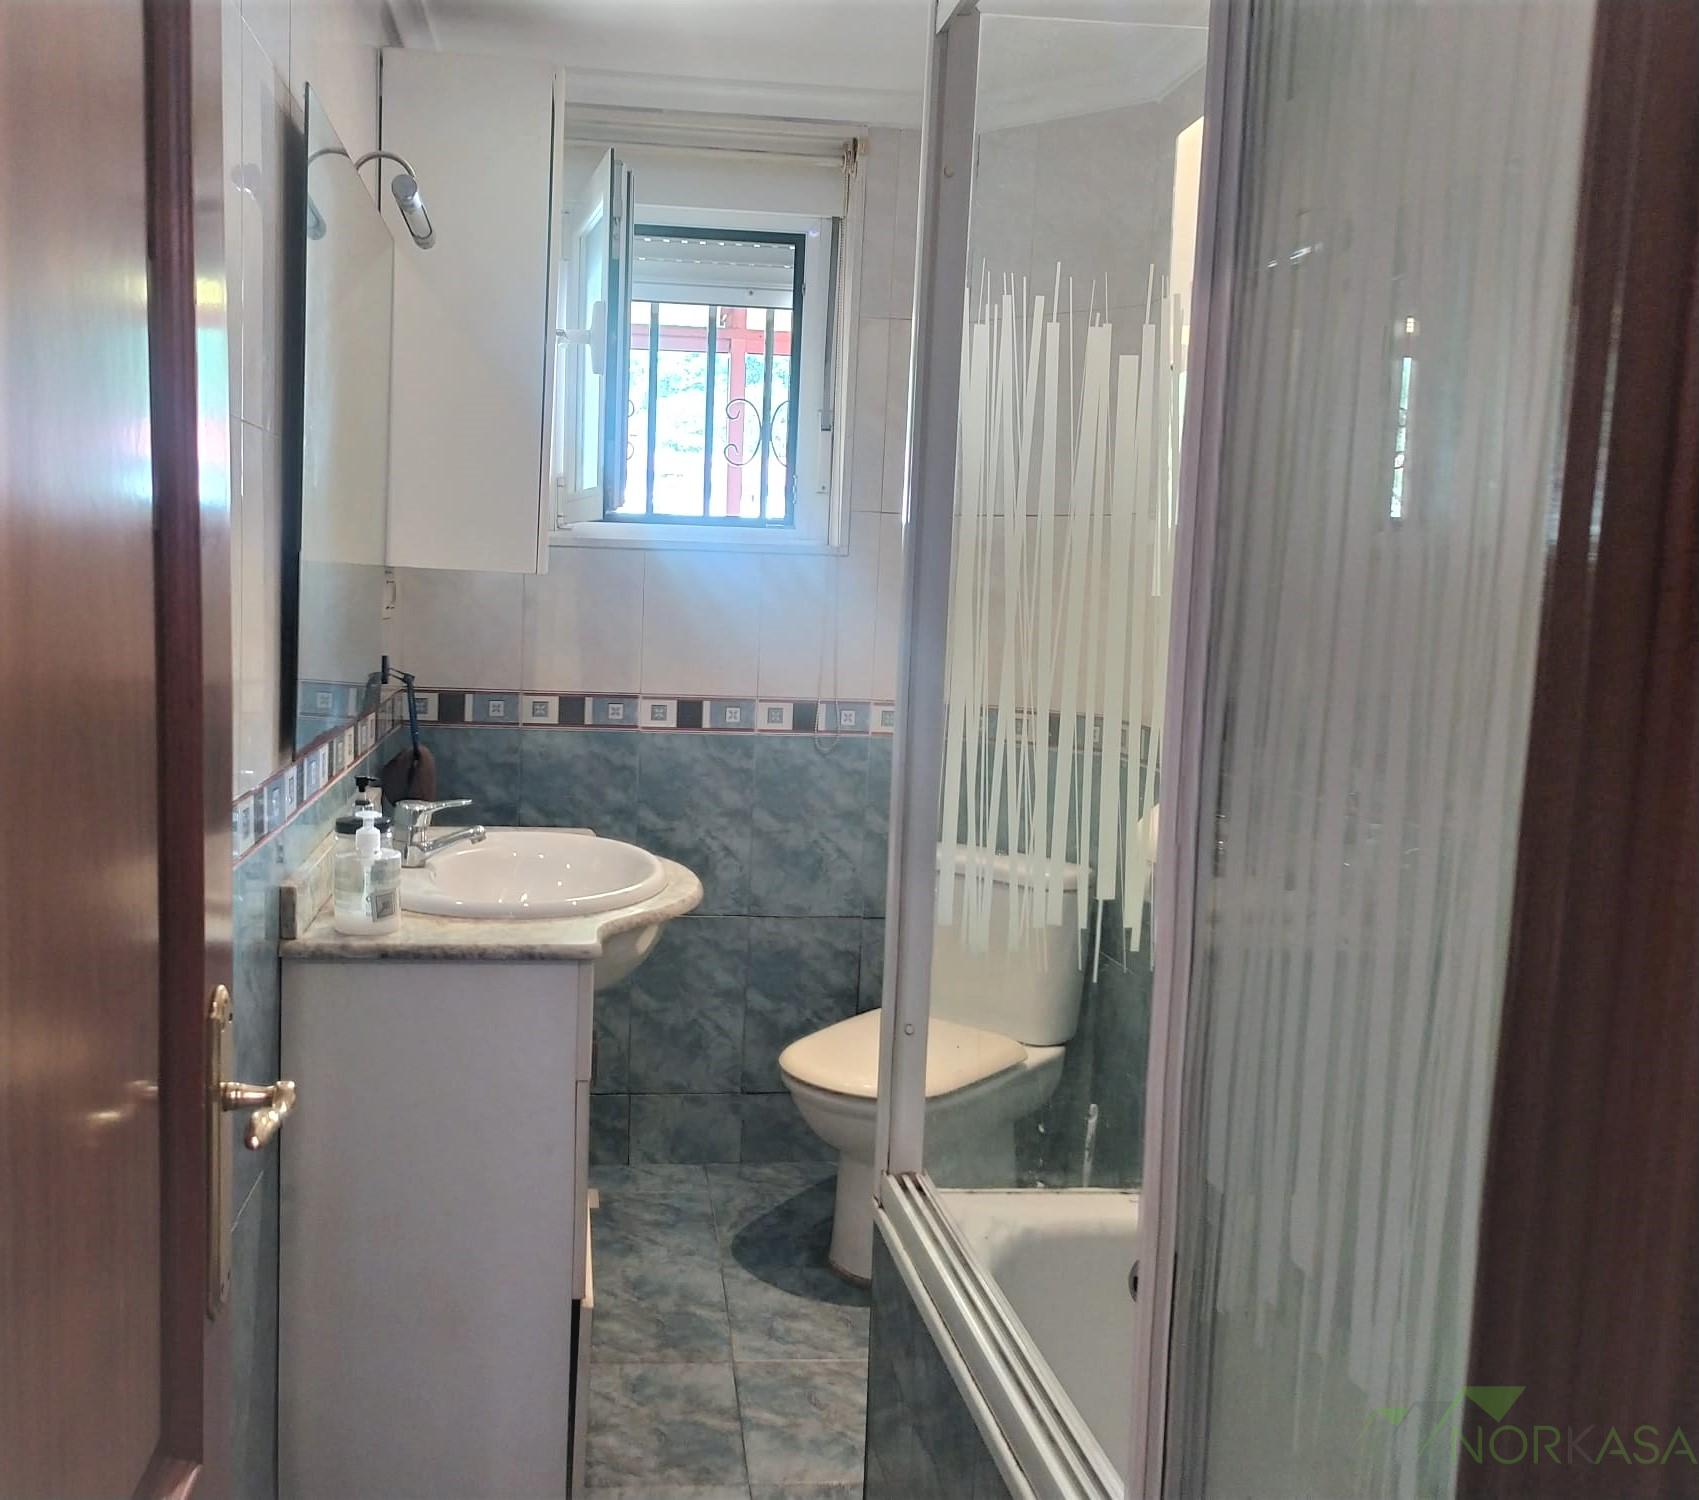 For sale of flat in Mieres Concejo